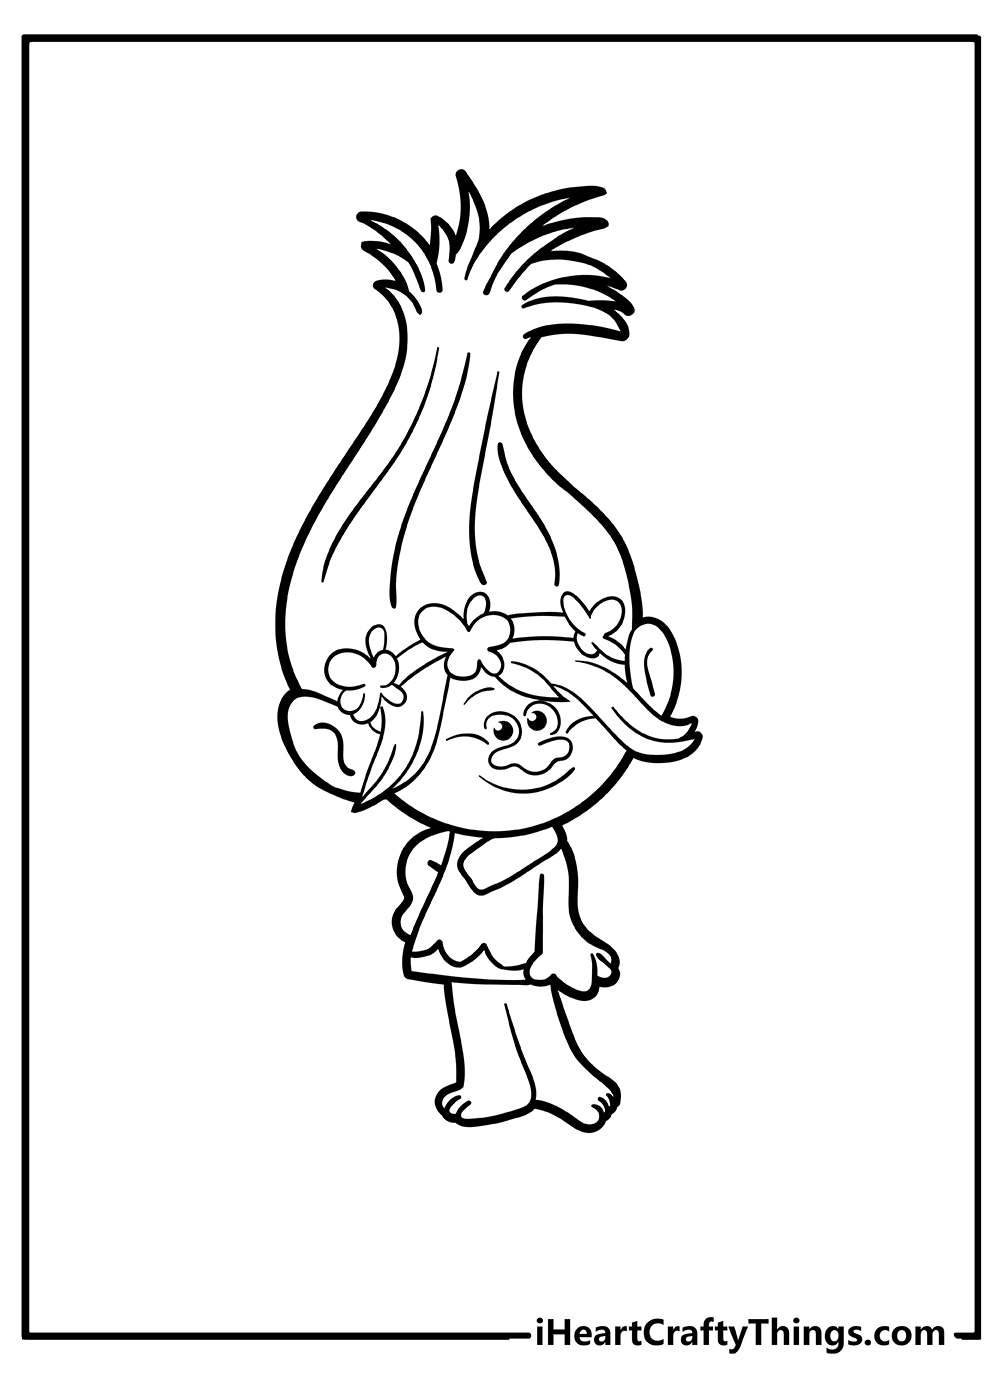 Troll Coloring Pages for adults free printable